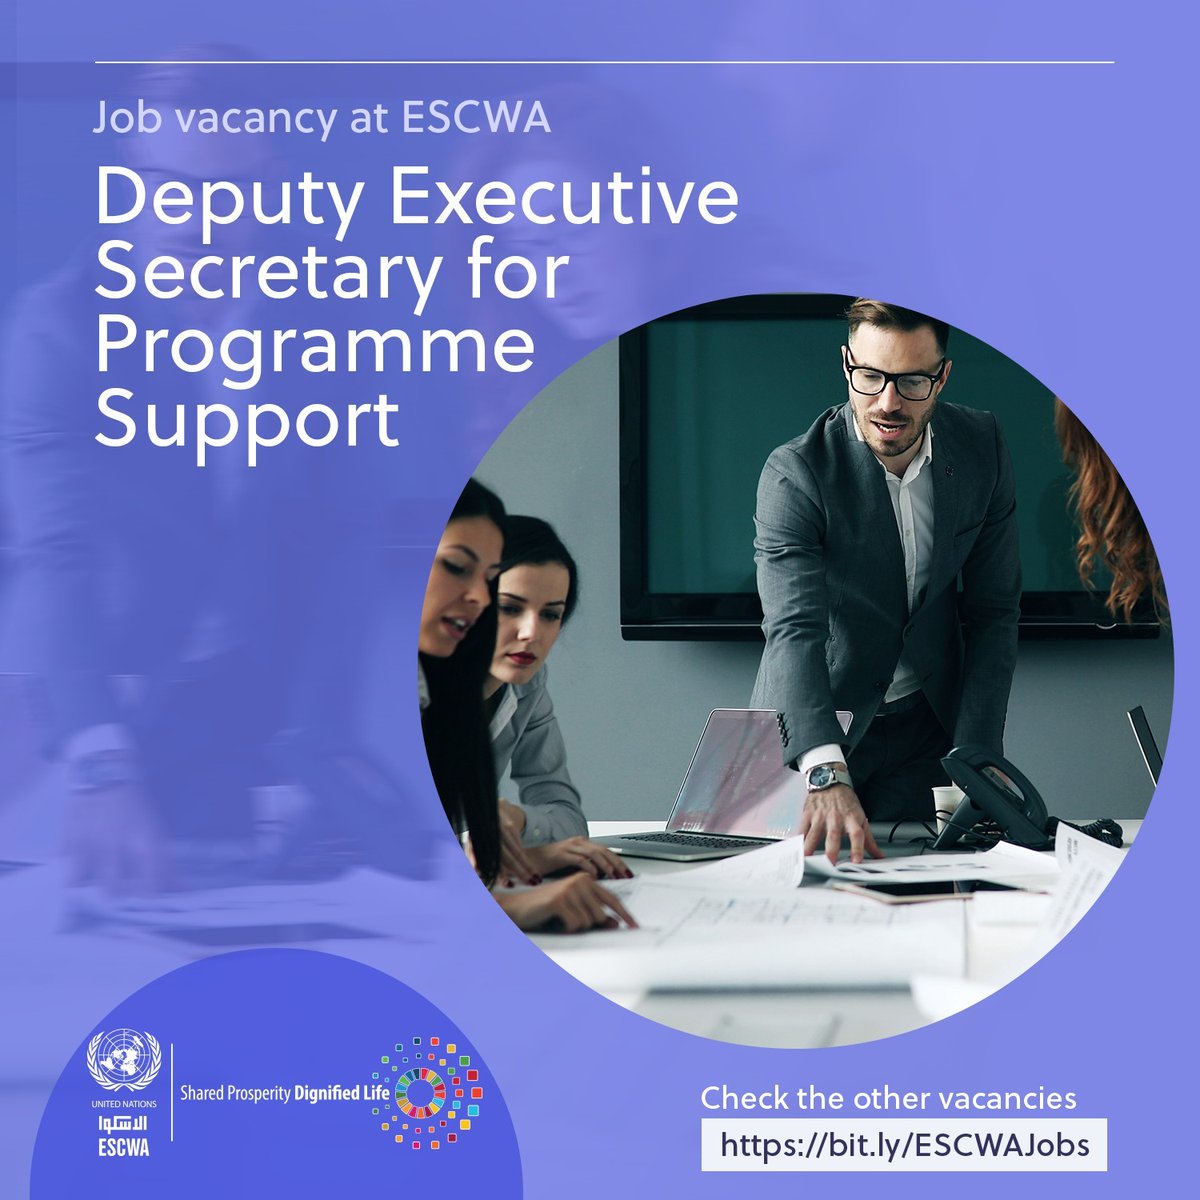 #ESCWA is hiring a Deputy Executive Secretary for Programme Support with 15+ years of experience in strategic management, human resources, administration, logistics, etc. Check the other requirements 👉 bit.ly/ESCWAJobs and apply by 28 April.